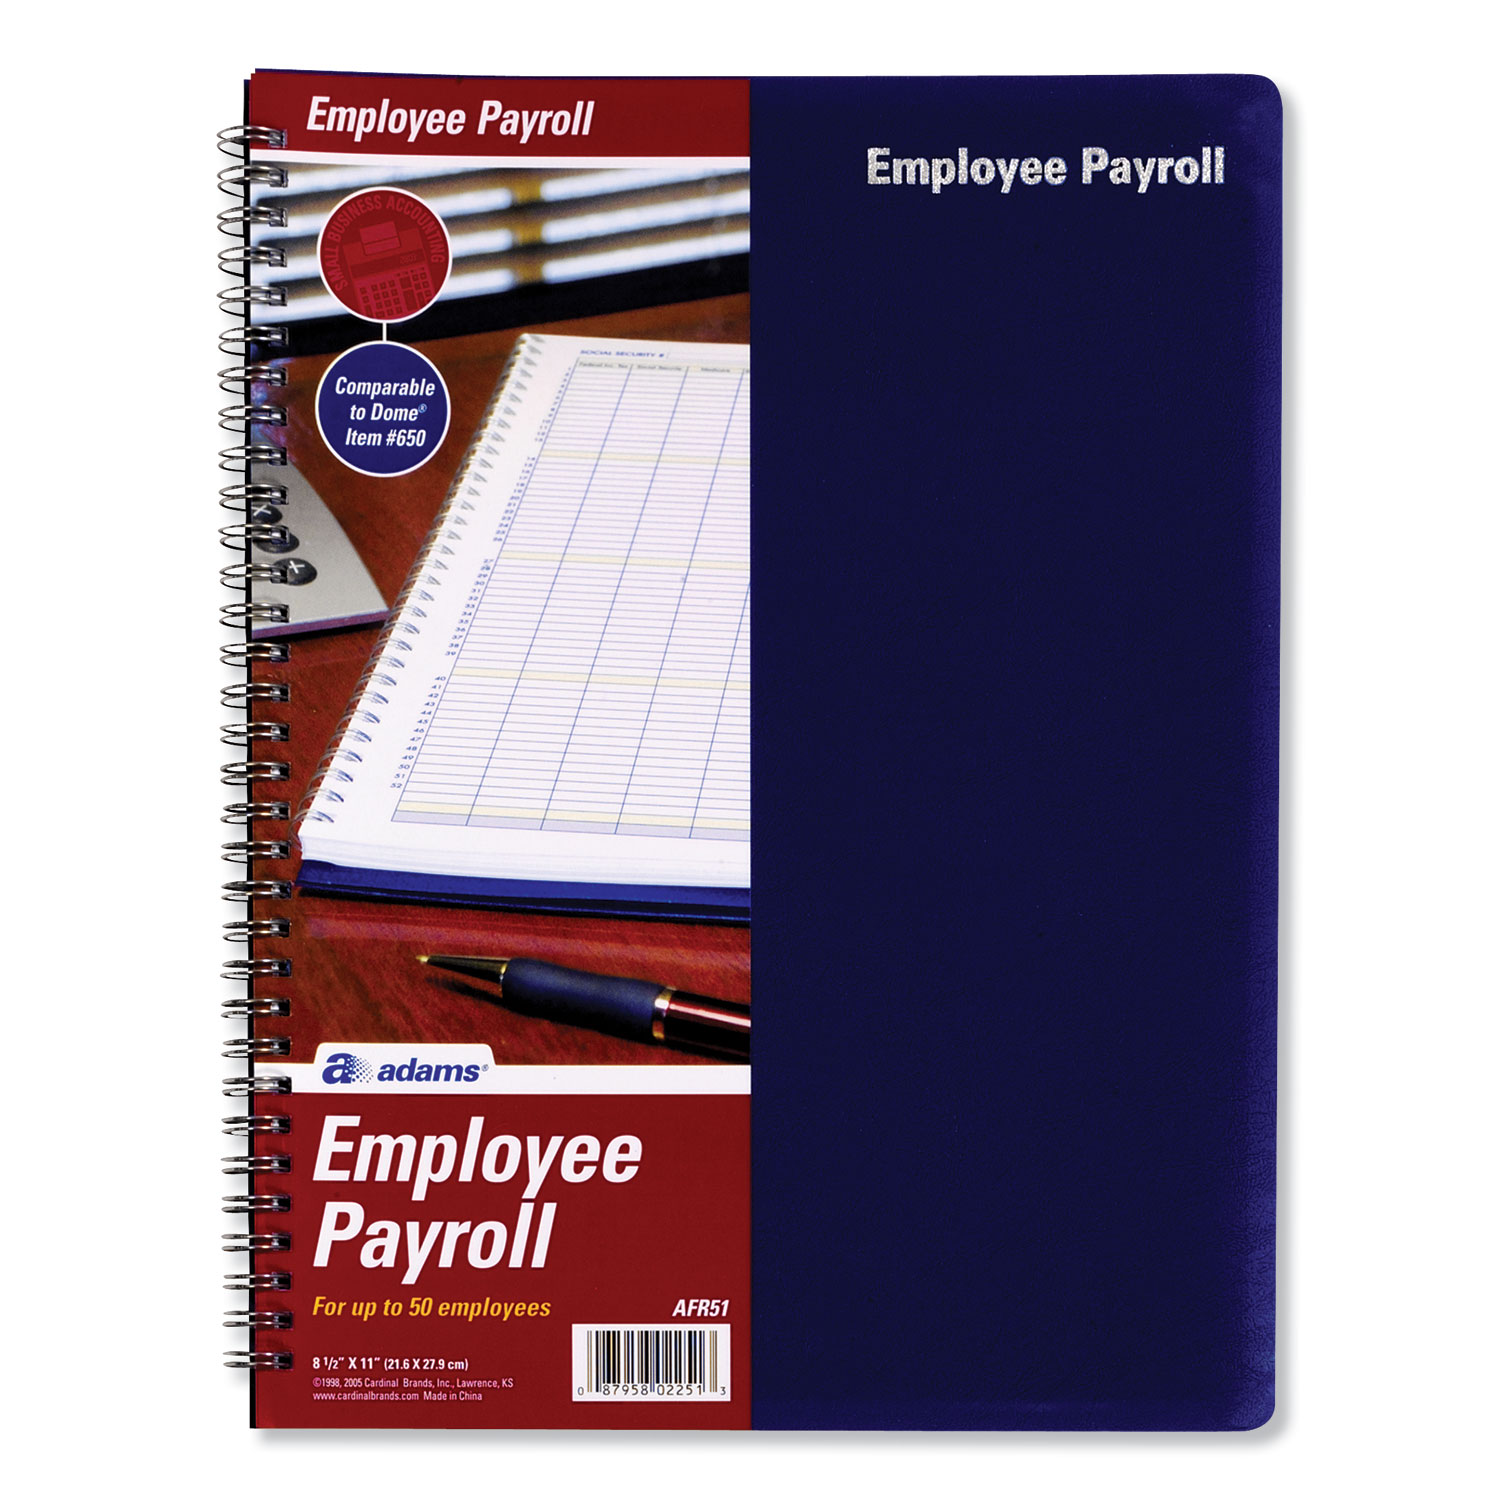  Adams AFR51 Employee Payroll Record Book, Royal Blue Cover, 11 x 8.5, 112 Pages (ABFAFR51) 